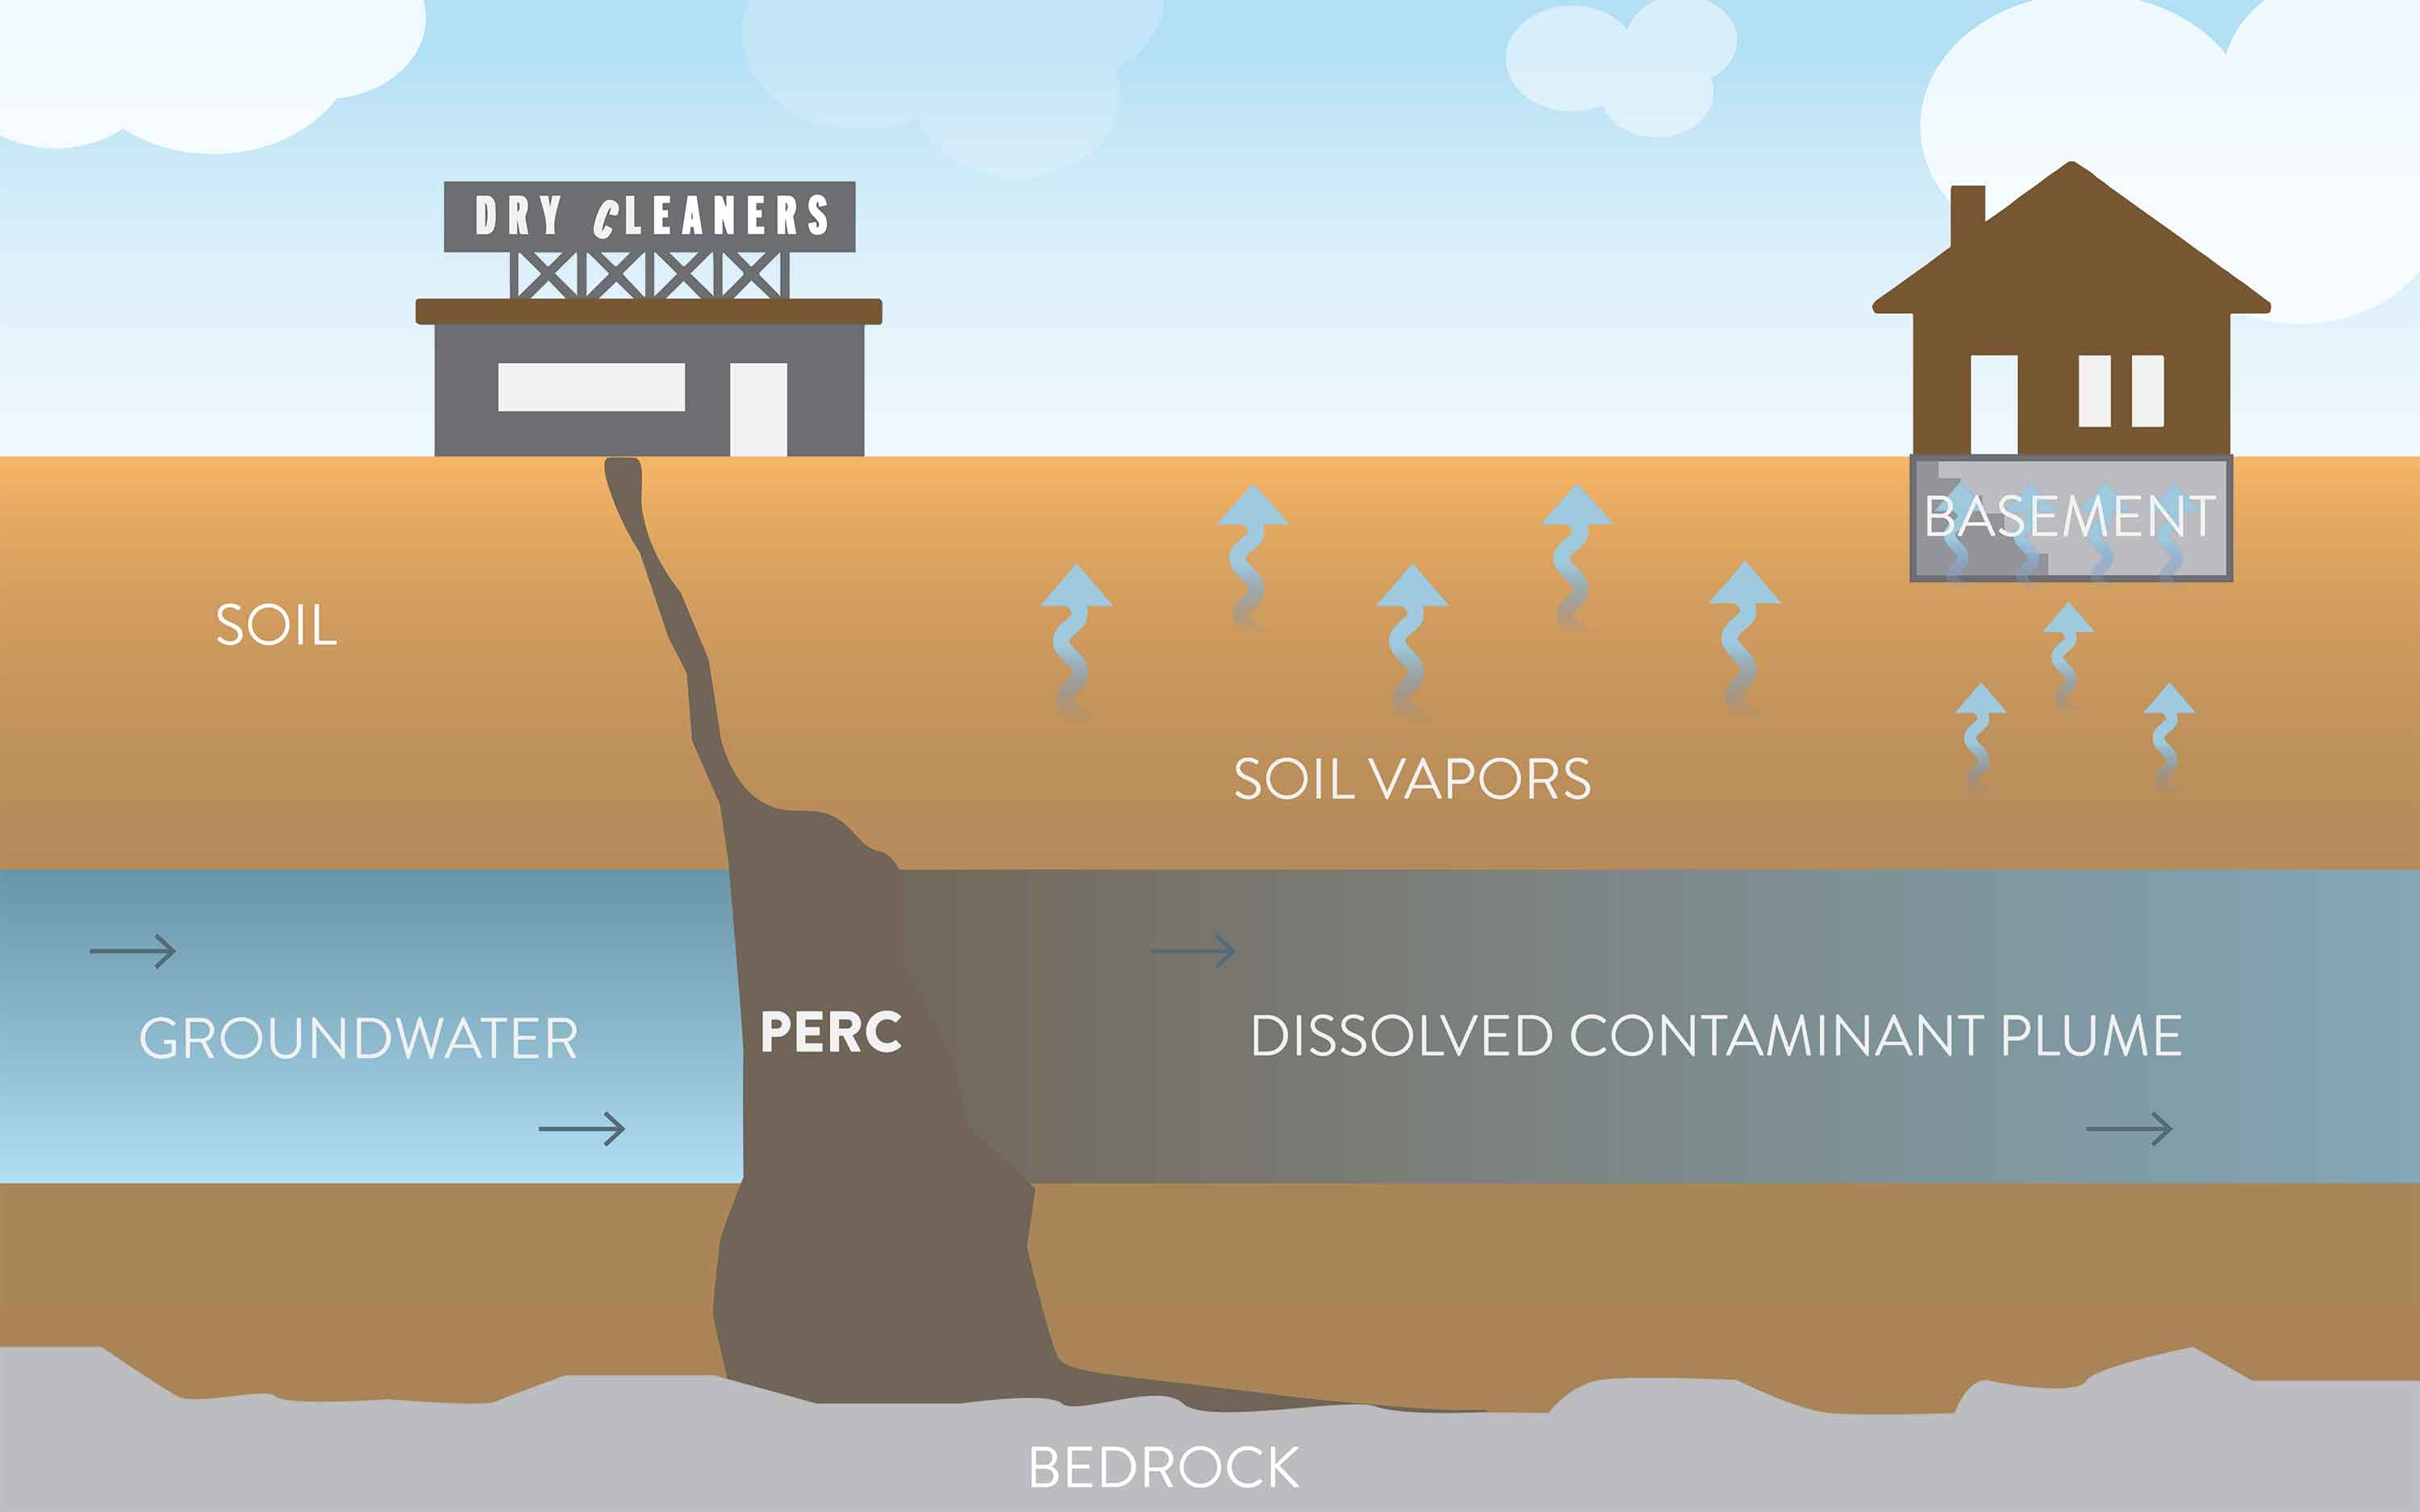 An illustration of perc soil vapors moving through the soil and into the basement of a home 